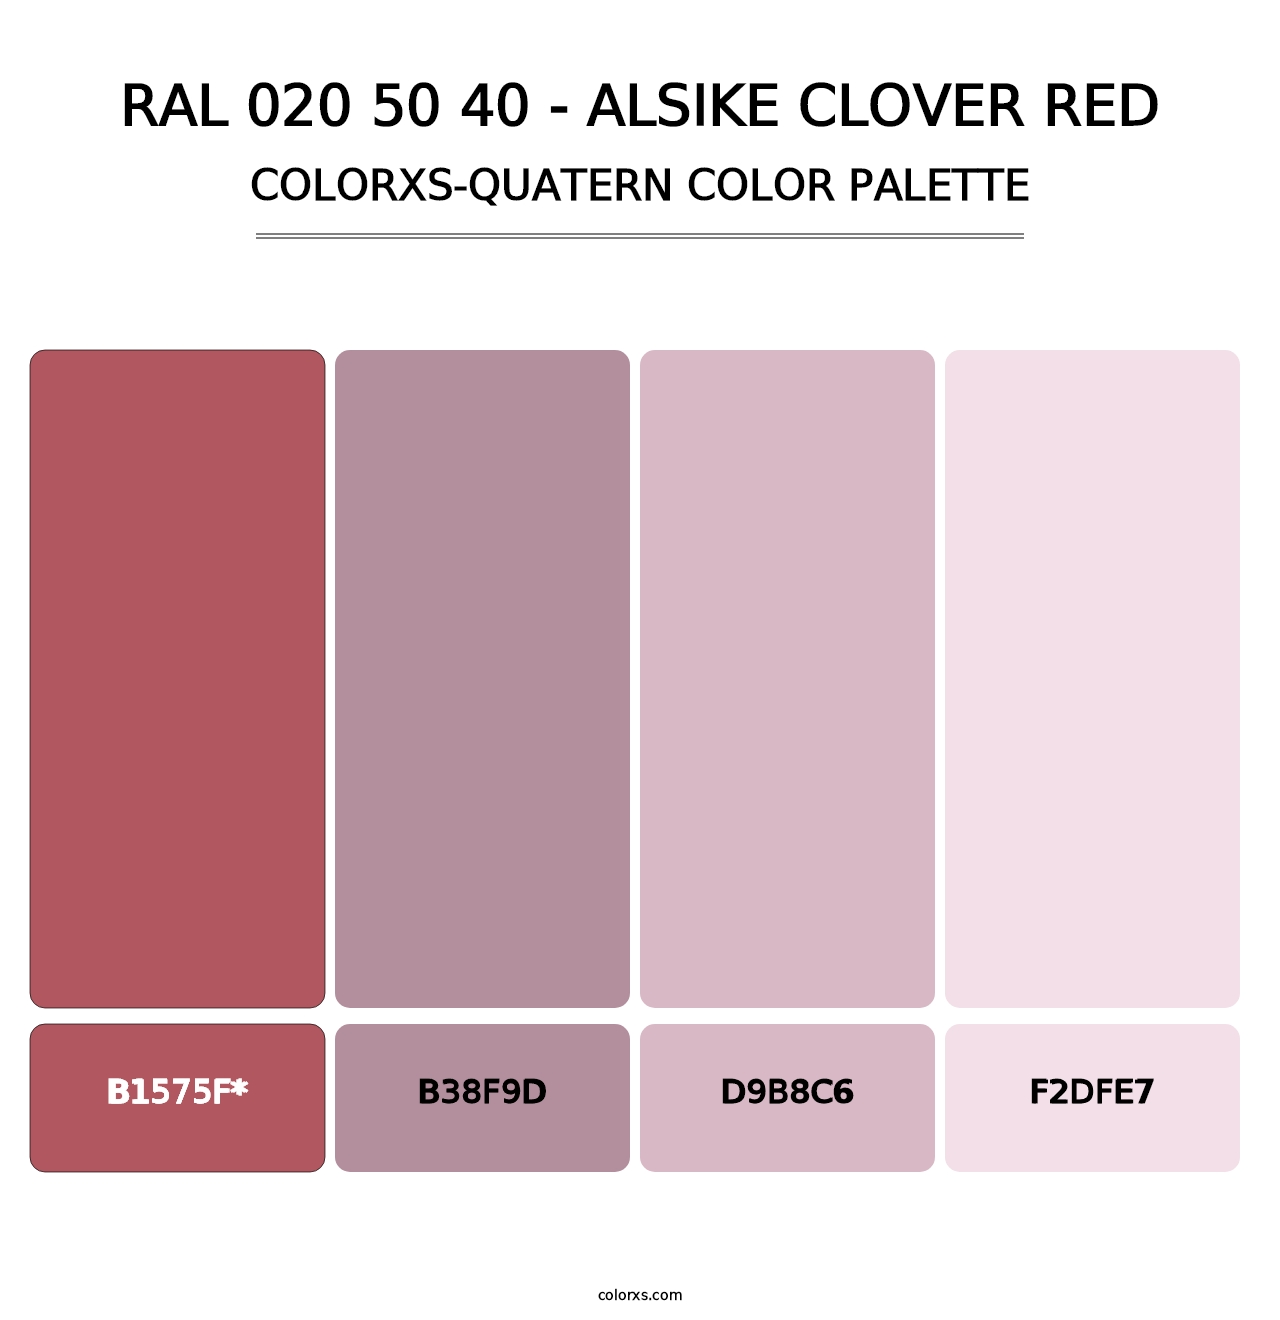 RAL 020 50 40 - Alsike Clover Red - Colorxs Quatern Palette